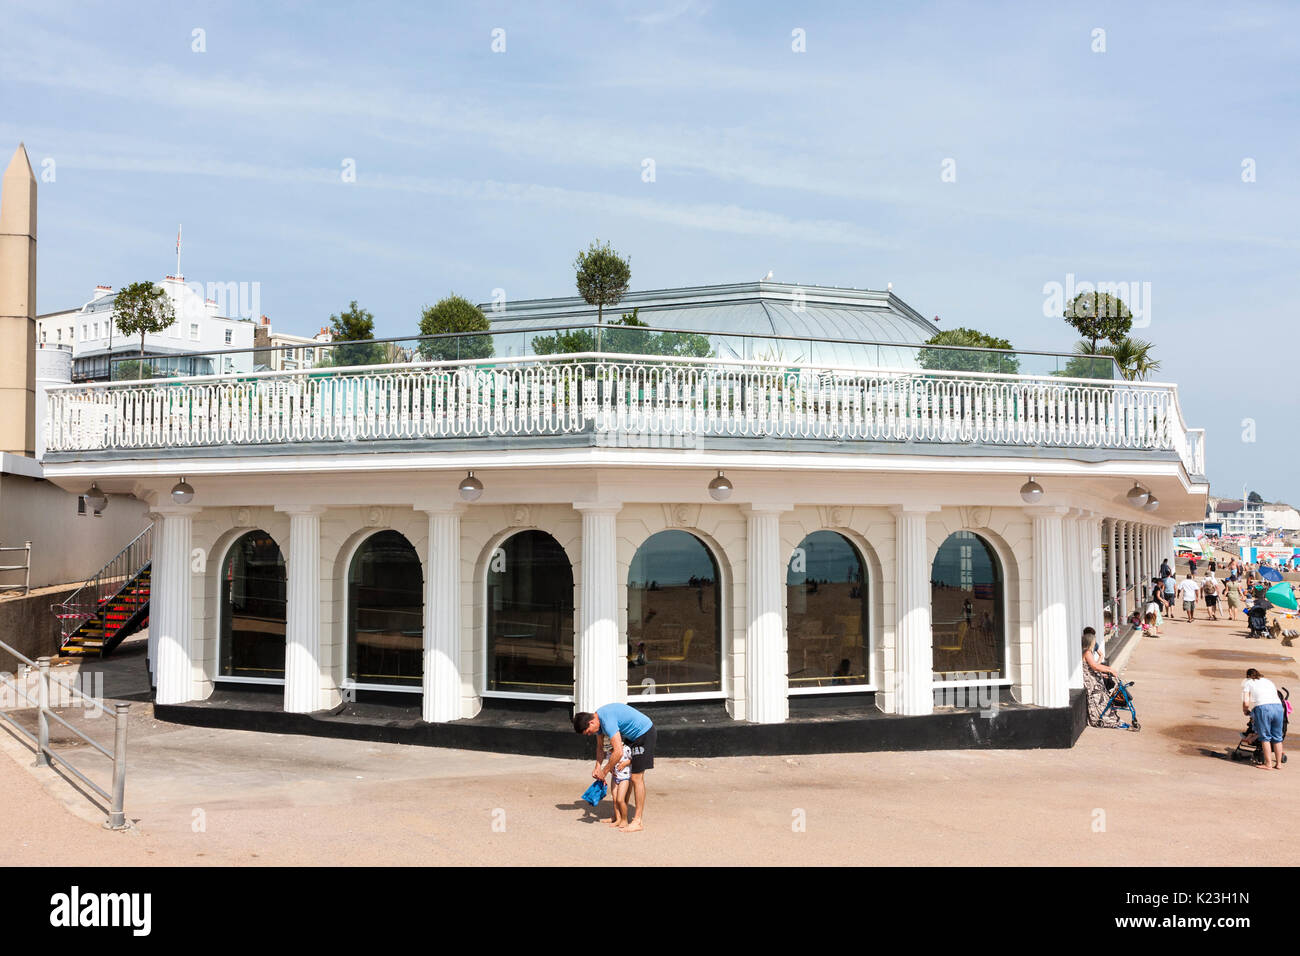 The Victorian Pavilion on the seafront at Ramsgate, restored by Weatherspoons into the largest pub in England. End view showing terrace and ground floor. Stock Photo